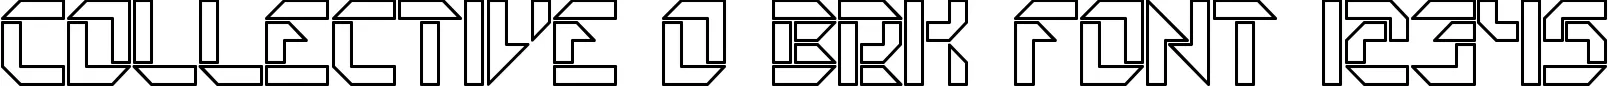 Dynamic Collective O BRK Font Preview https://safirsoft.com